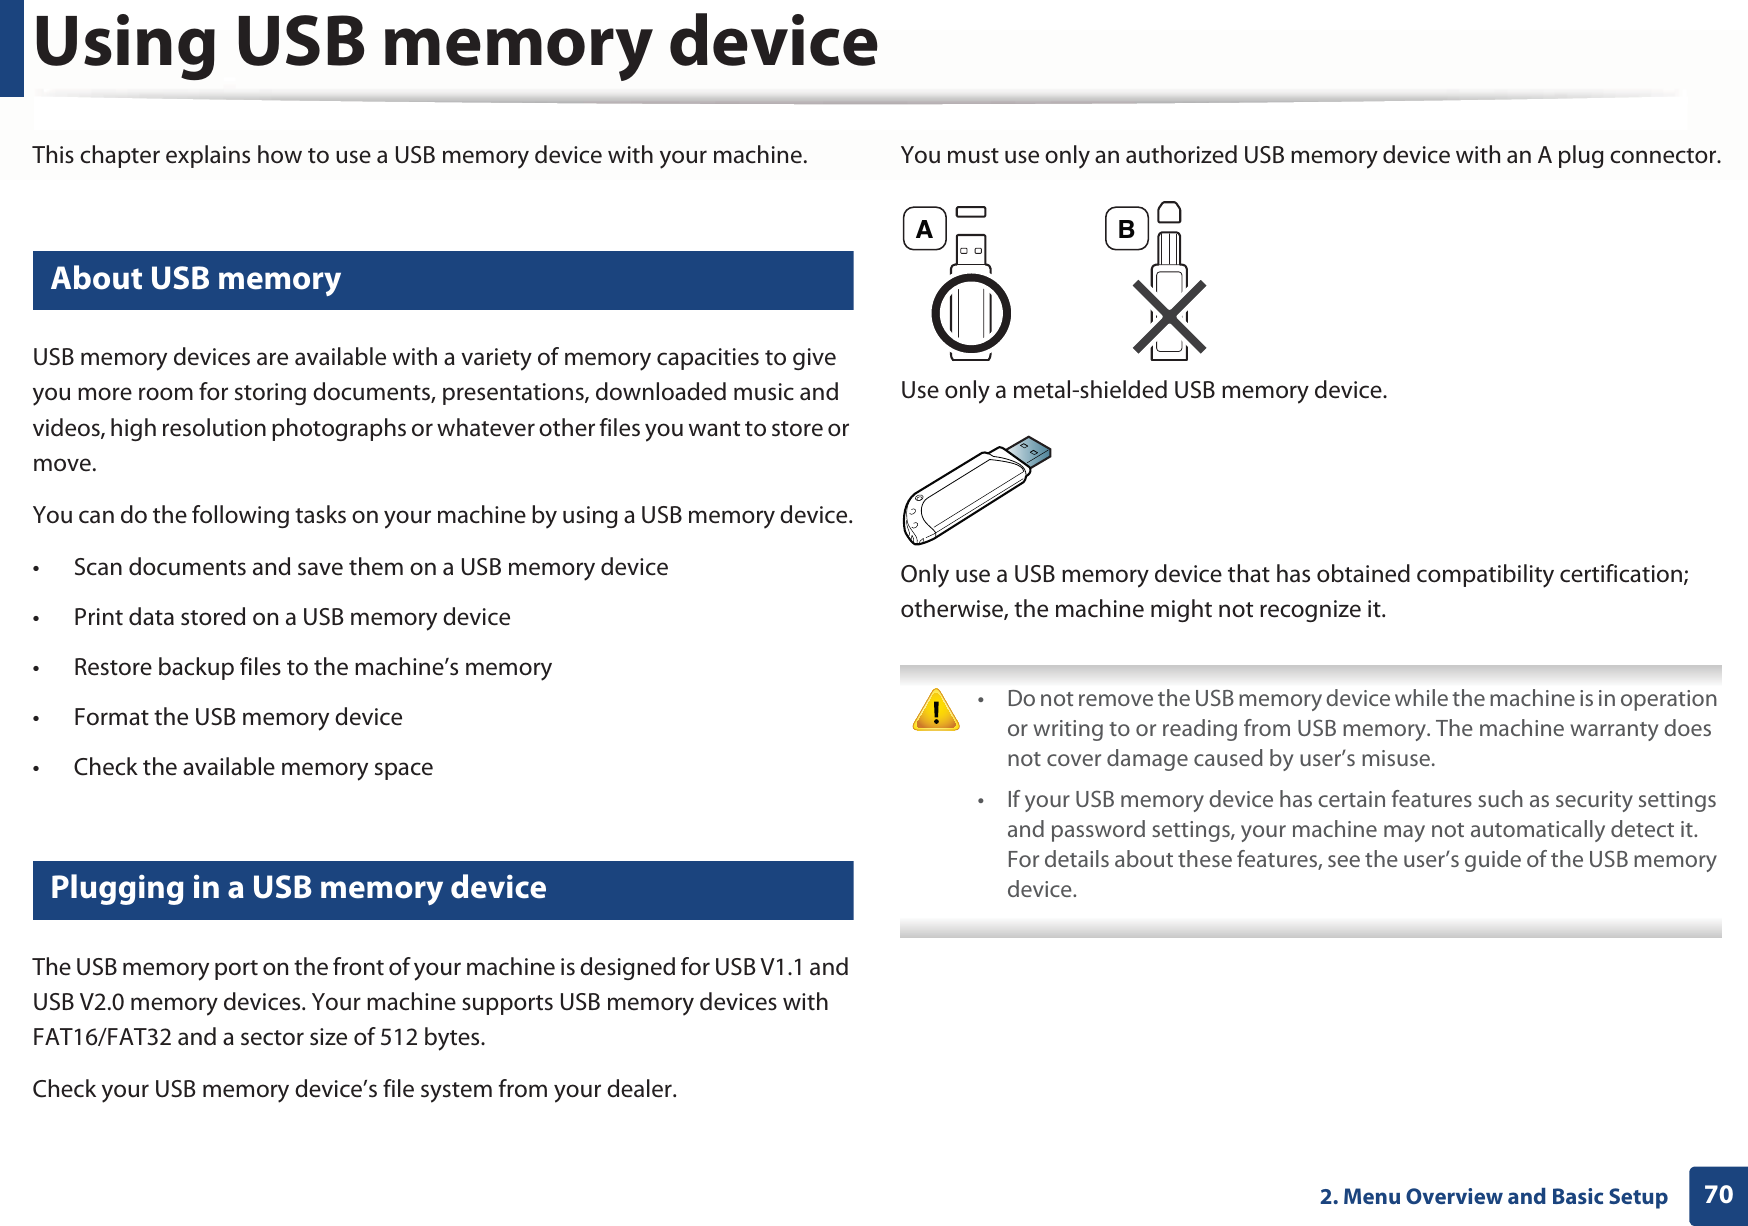 702. Menu Overview and Basic SetupUsing USB memory deviceThis chapter explains how to use a USB memory device with your machine.23 About USB memoryUSB memory devices are available with a variety of memory capacities to give you more room for storing documents, presentations, downloaded music and videos, high resolution photographs or whatever other files you want to store or move.You can do the following tasks on your machine by using a USB memory device.• Scan documents and save them on a USB memory device• Print data stored on a USB memory device• Restore backup files to the machine’s memory• Format the USB memory device• Check the available memory space24 Plugging in a USB memory deviceThe USB memory port on the front of your machine is designed for USB V1.1 and USB V2.0 memory devices. Your machine supports USB memory devices with FAT16/FAT32 and a sector size of 512 bytes.Check your USB memory device’s file system from your dealer.You must use only an authorized USB memory device with an A plug connector.Use only a metal-shielded USB memory device.Only use a USB memory device that has obtained compatibility certification; otherwise, the machine might not recognize it. • Do not remove the USB memory device while the machine is in operation or writing to or reading from USB memory. The machine warranty does not cover damage caused by user’s misuse. • If your USB memory device has certain features such as security settings and password settings, your machine may not automatically detect it. For details about these features, see the user’s guide of the USB memory device. A B